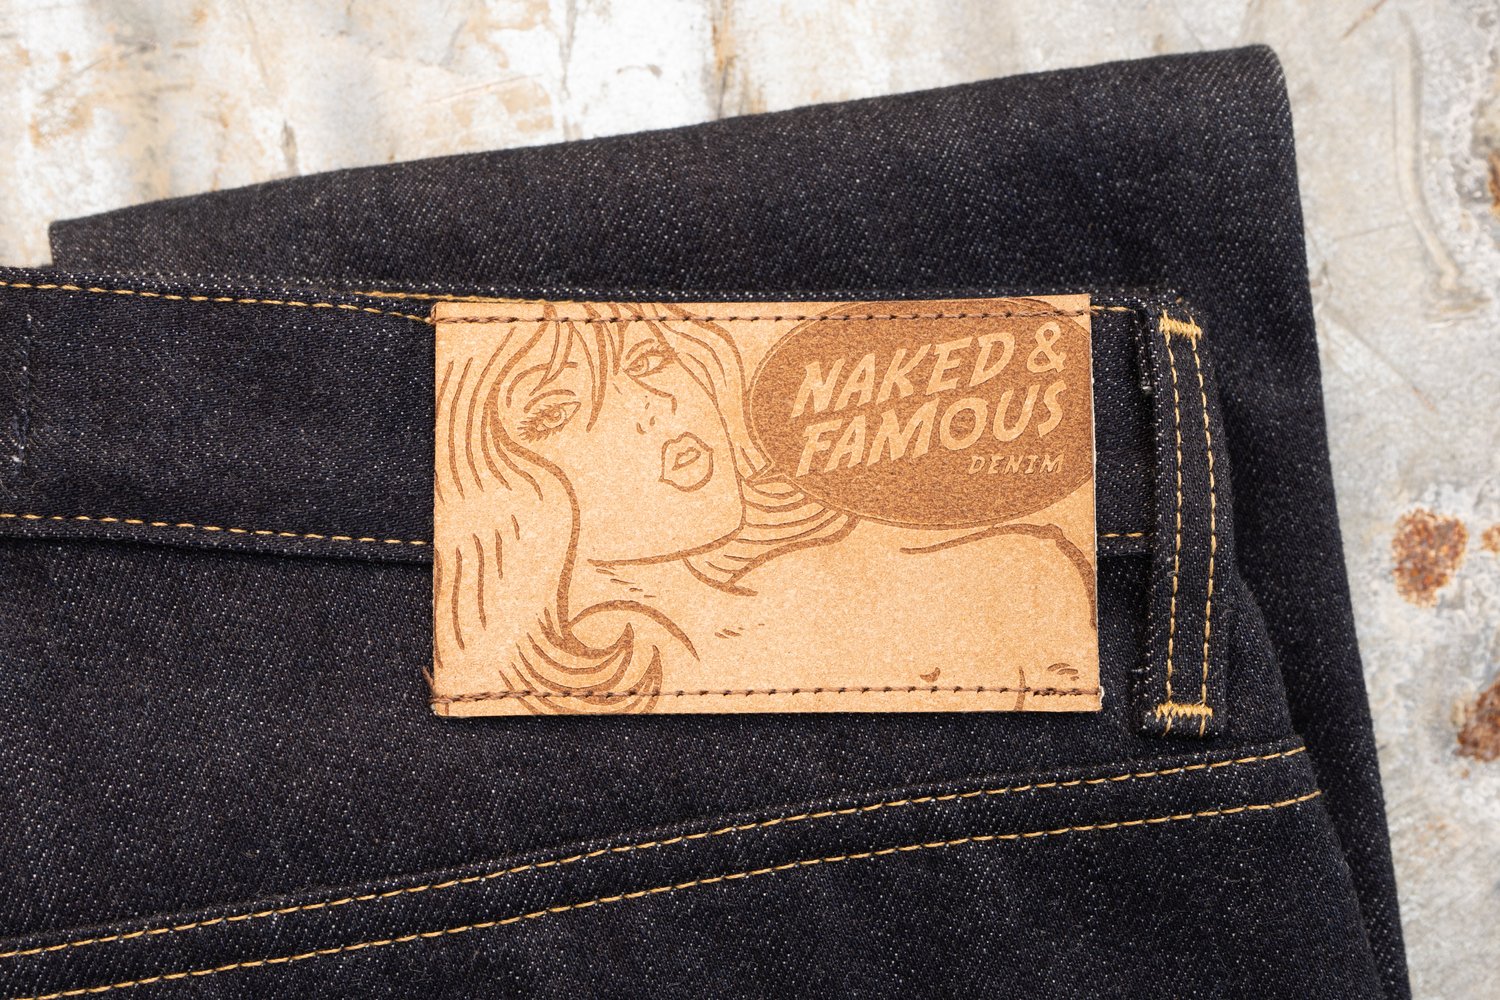 Naked & Famous Denim - Salvaged Selvedge - Recycled Leather Patch